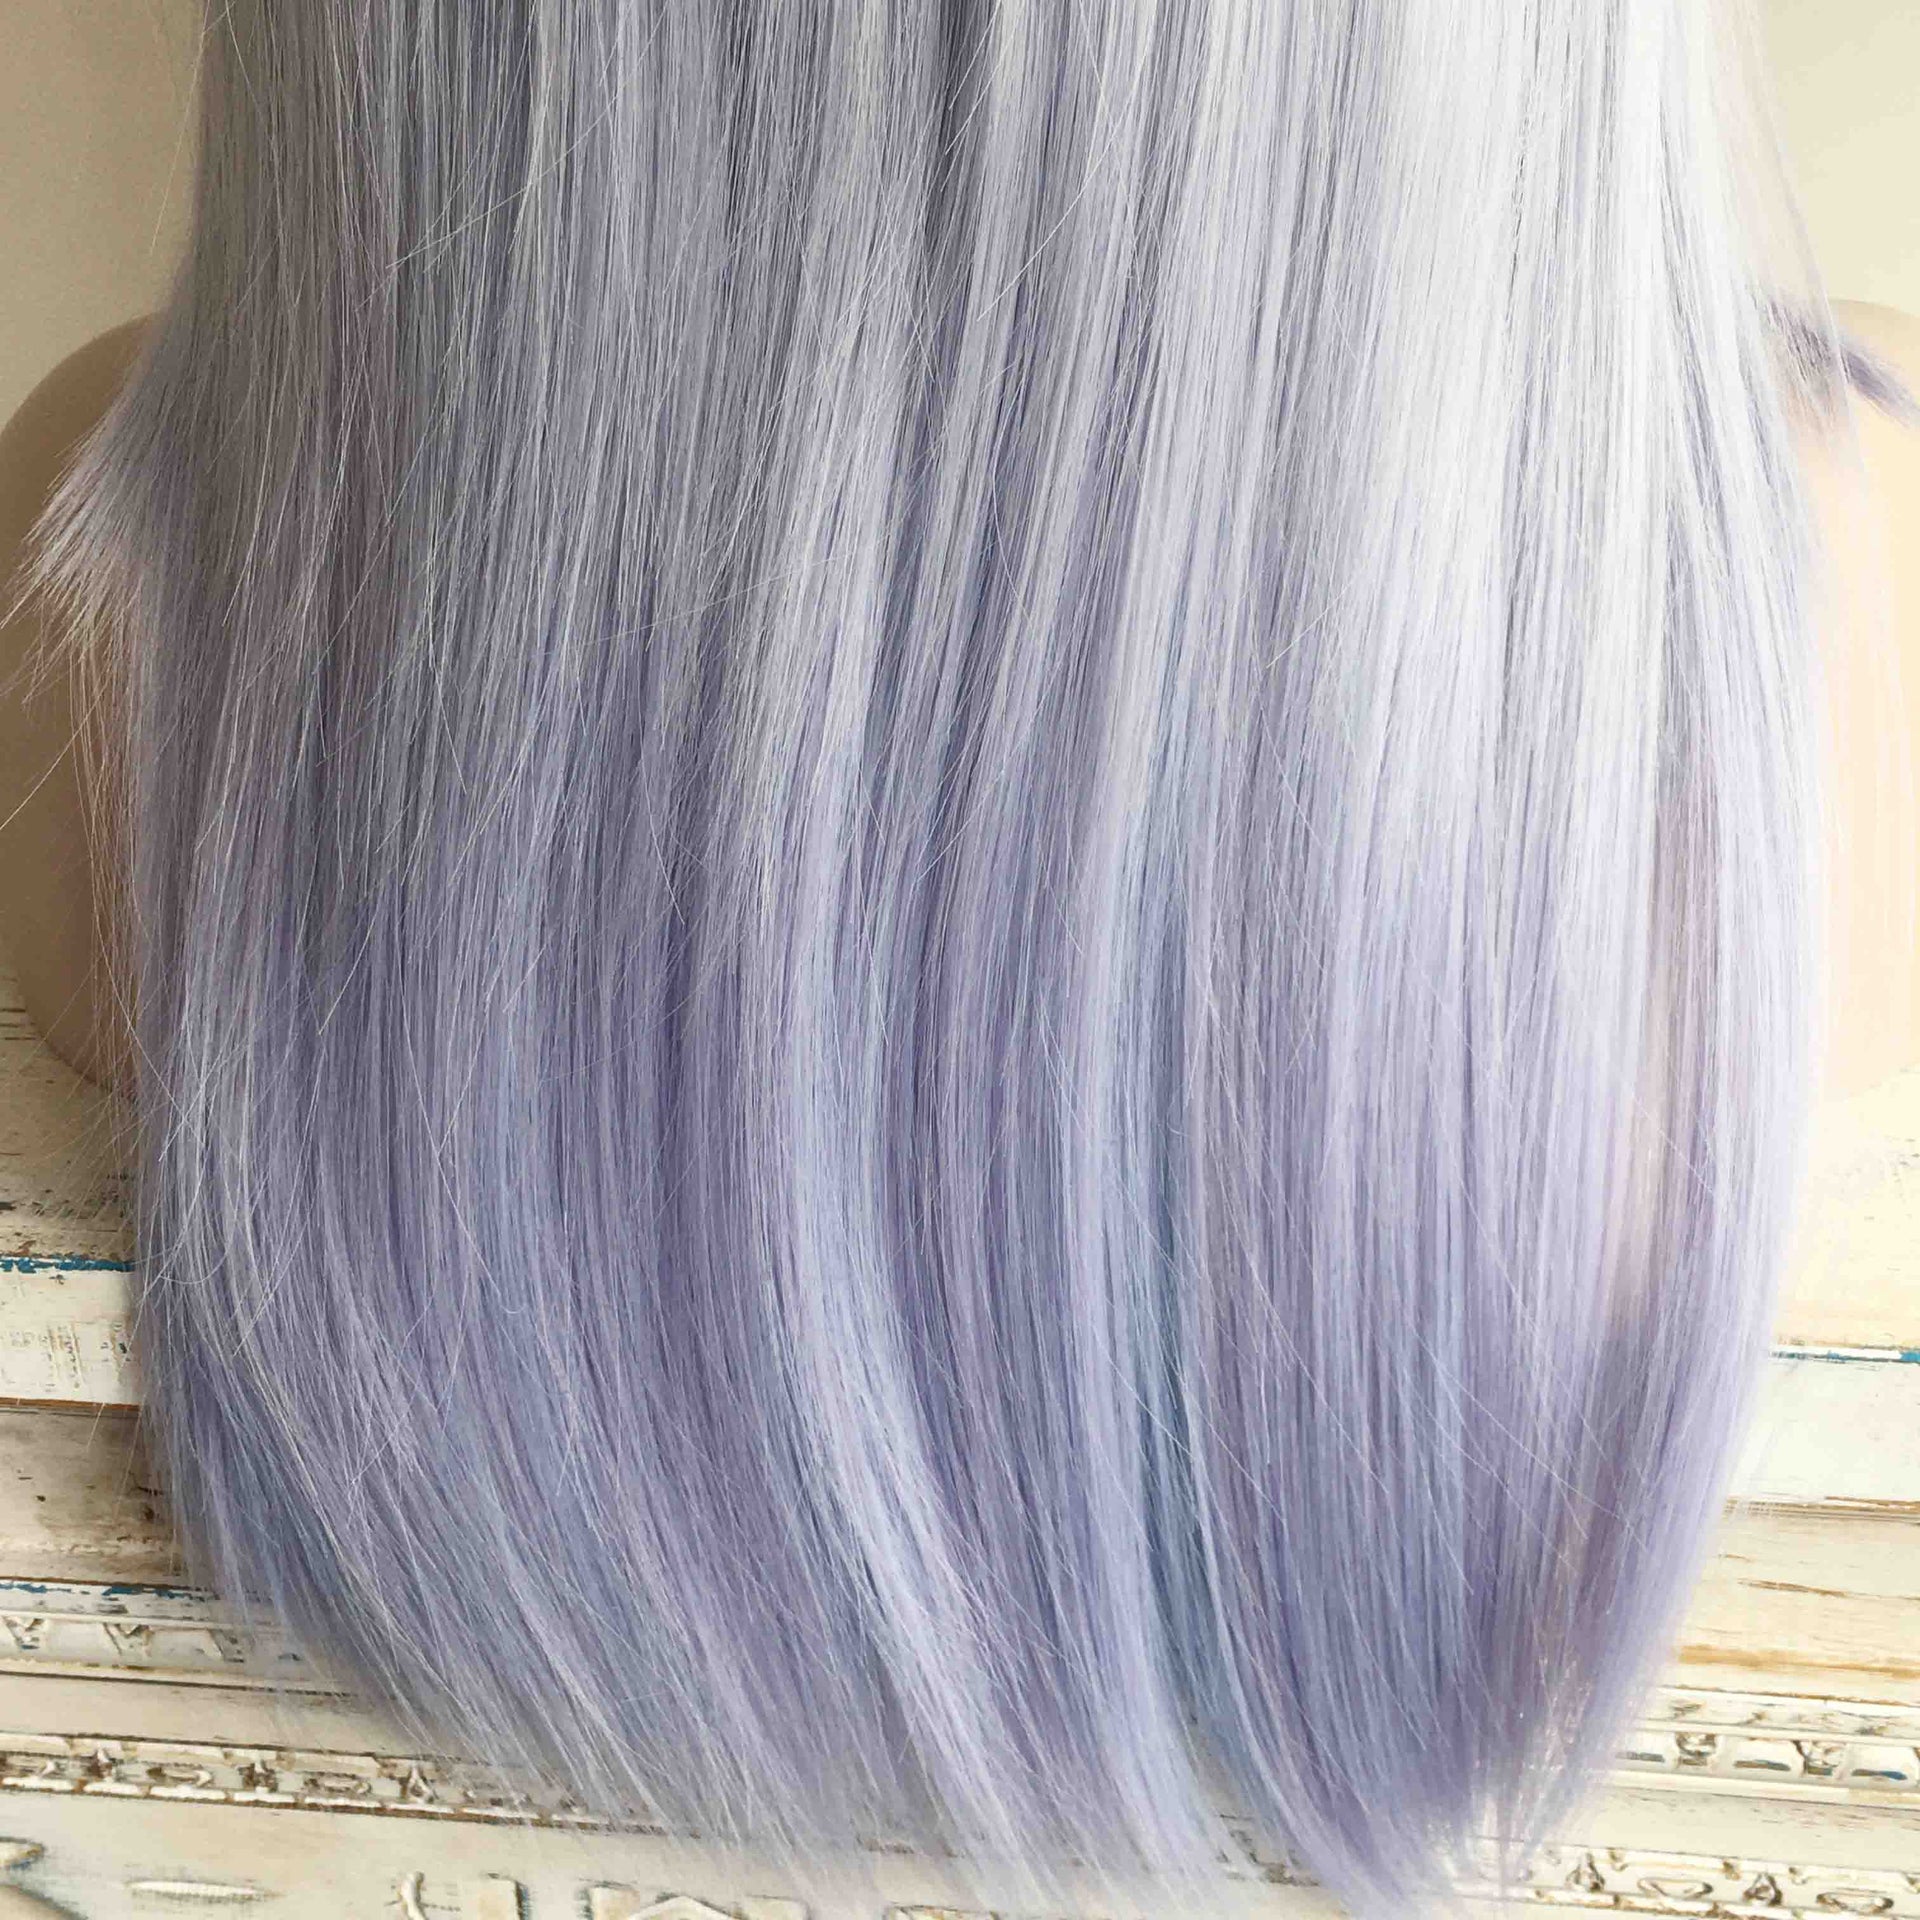 nevermindyrhead Women Light Lavender Purple And Blue Ombre Long Straight Fringe Bangs Wig